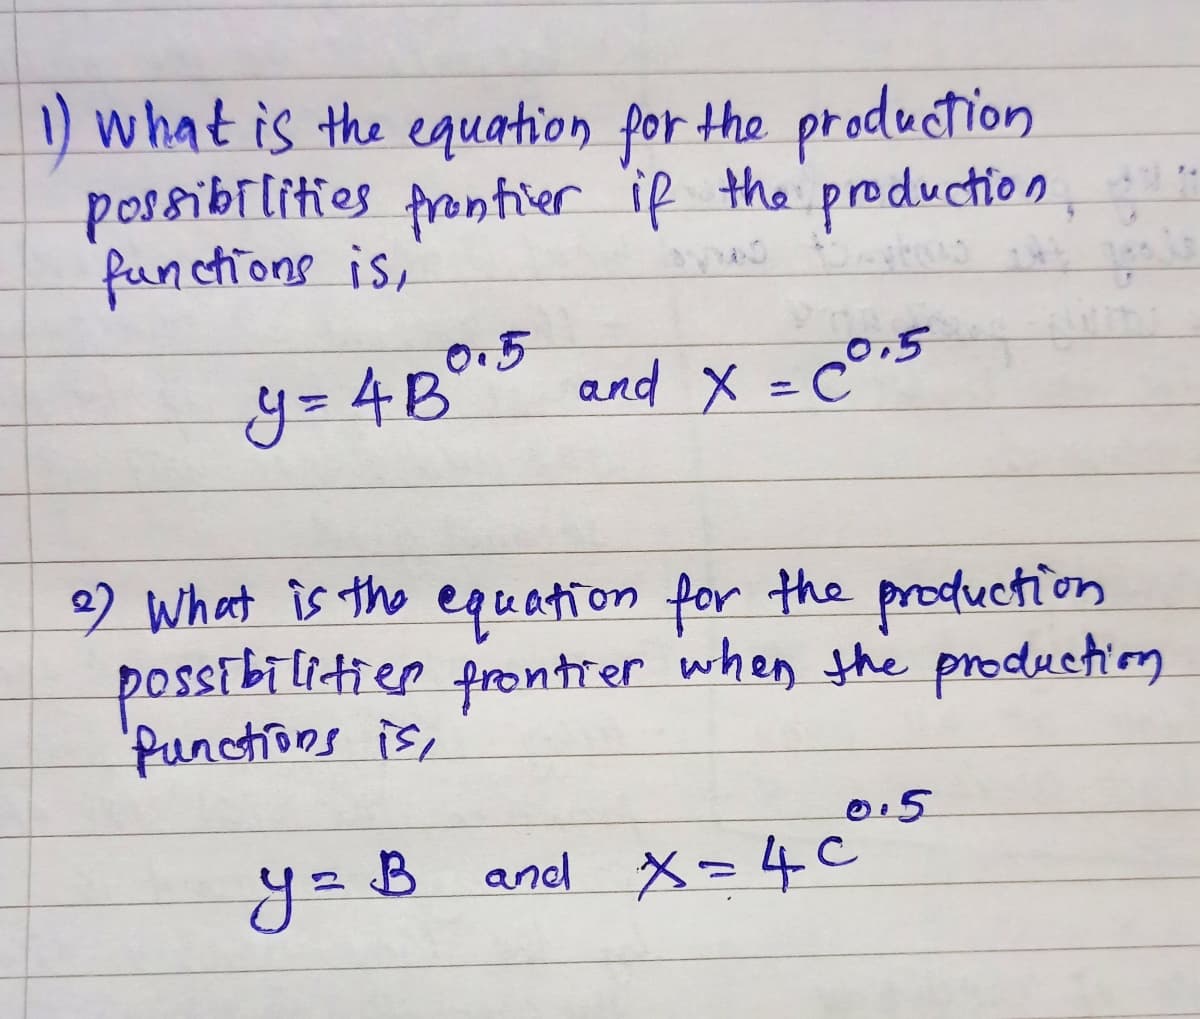 1) what is the equation for the production
possibilities frontier if the production.
functions is,
40
y = 4B0.5 and X = C0.5
2) What is the equation for the production
possibilitier frontier when the production
"Punctions is,
0.5
y = B and X = 4c